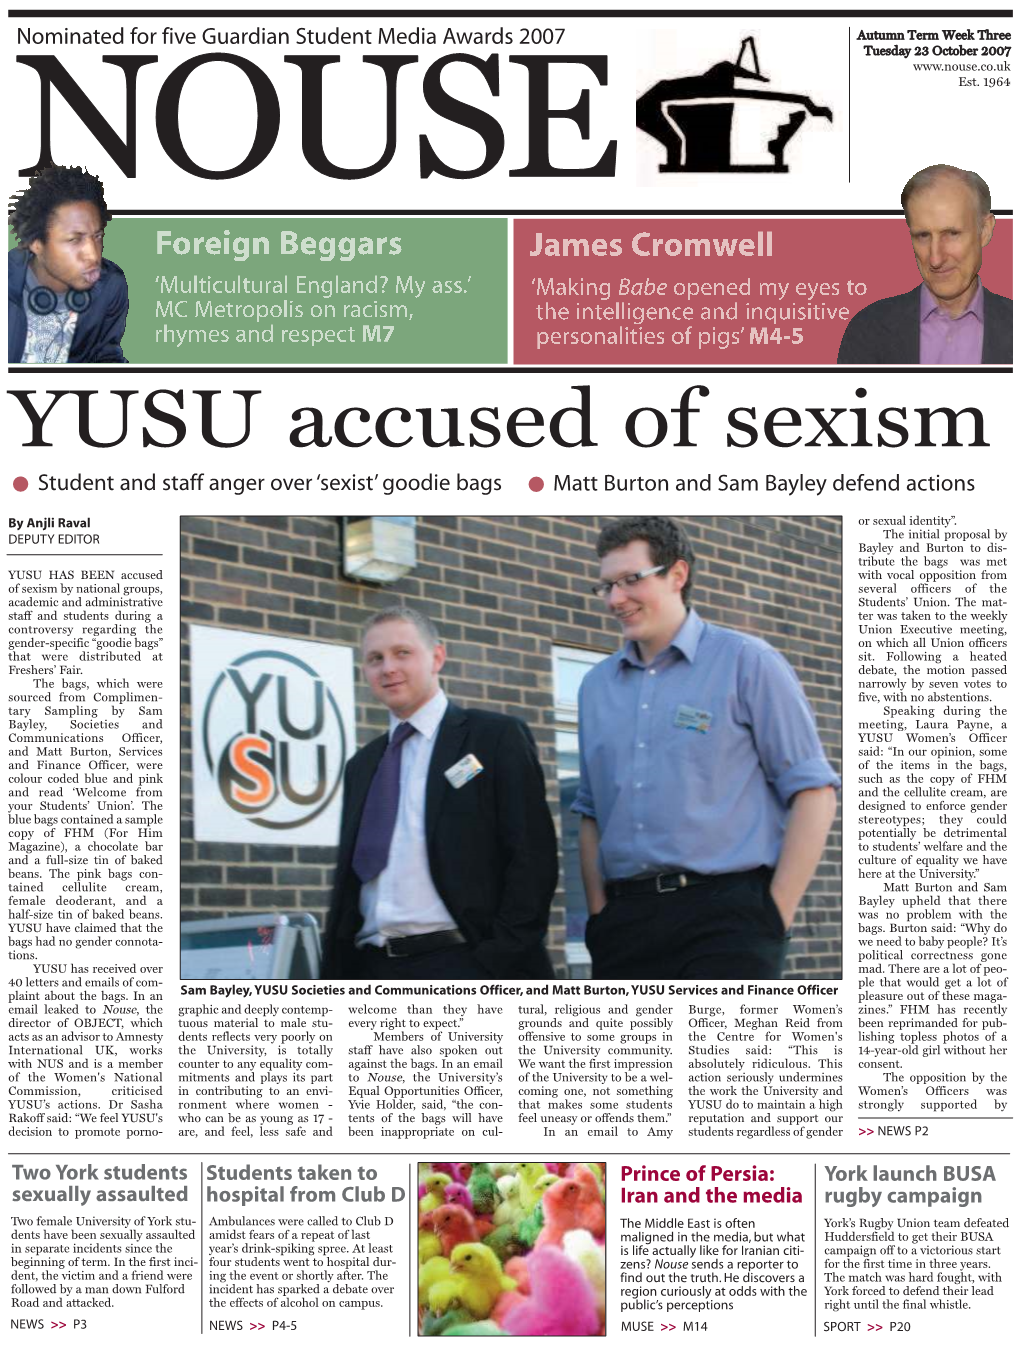 YUSU Accused of Sexism Student and Staff Anger Over ‘Sexist’ Goodie Bags Matt Burton and Sam Bayley Defend Actions